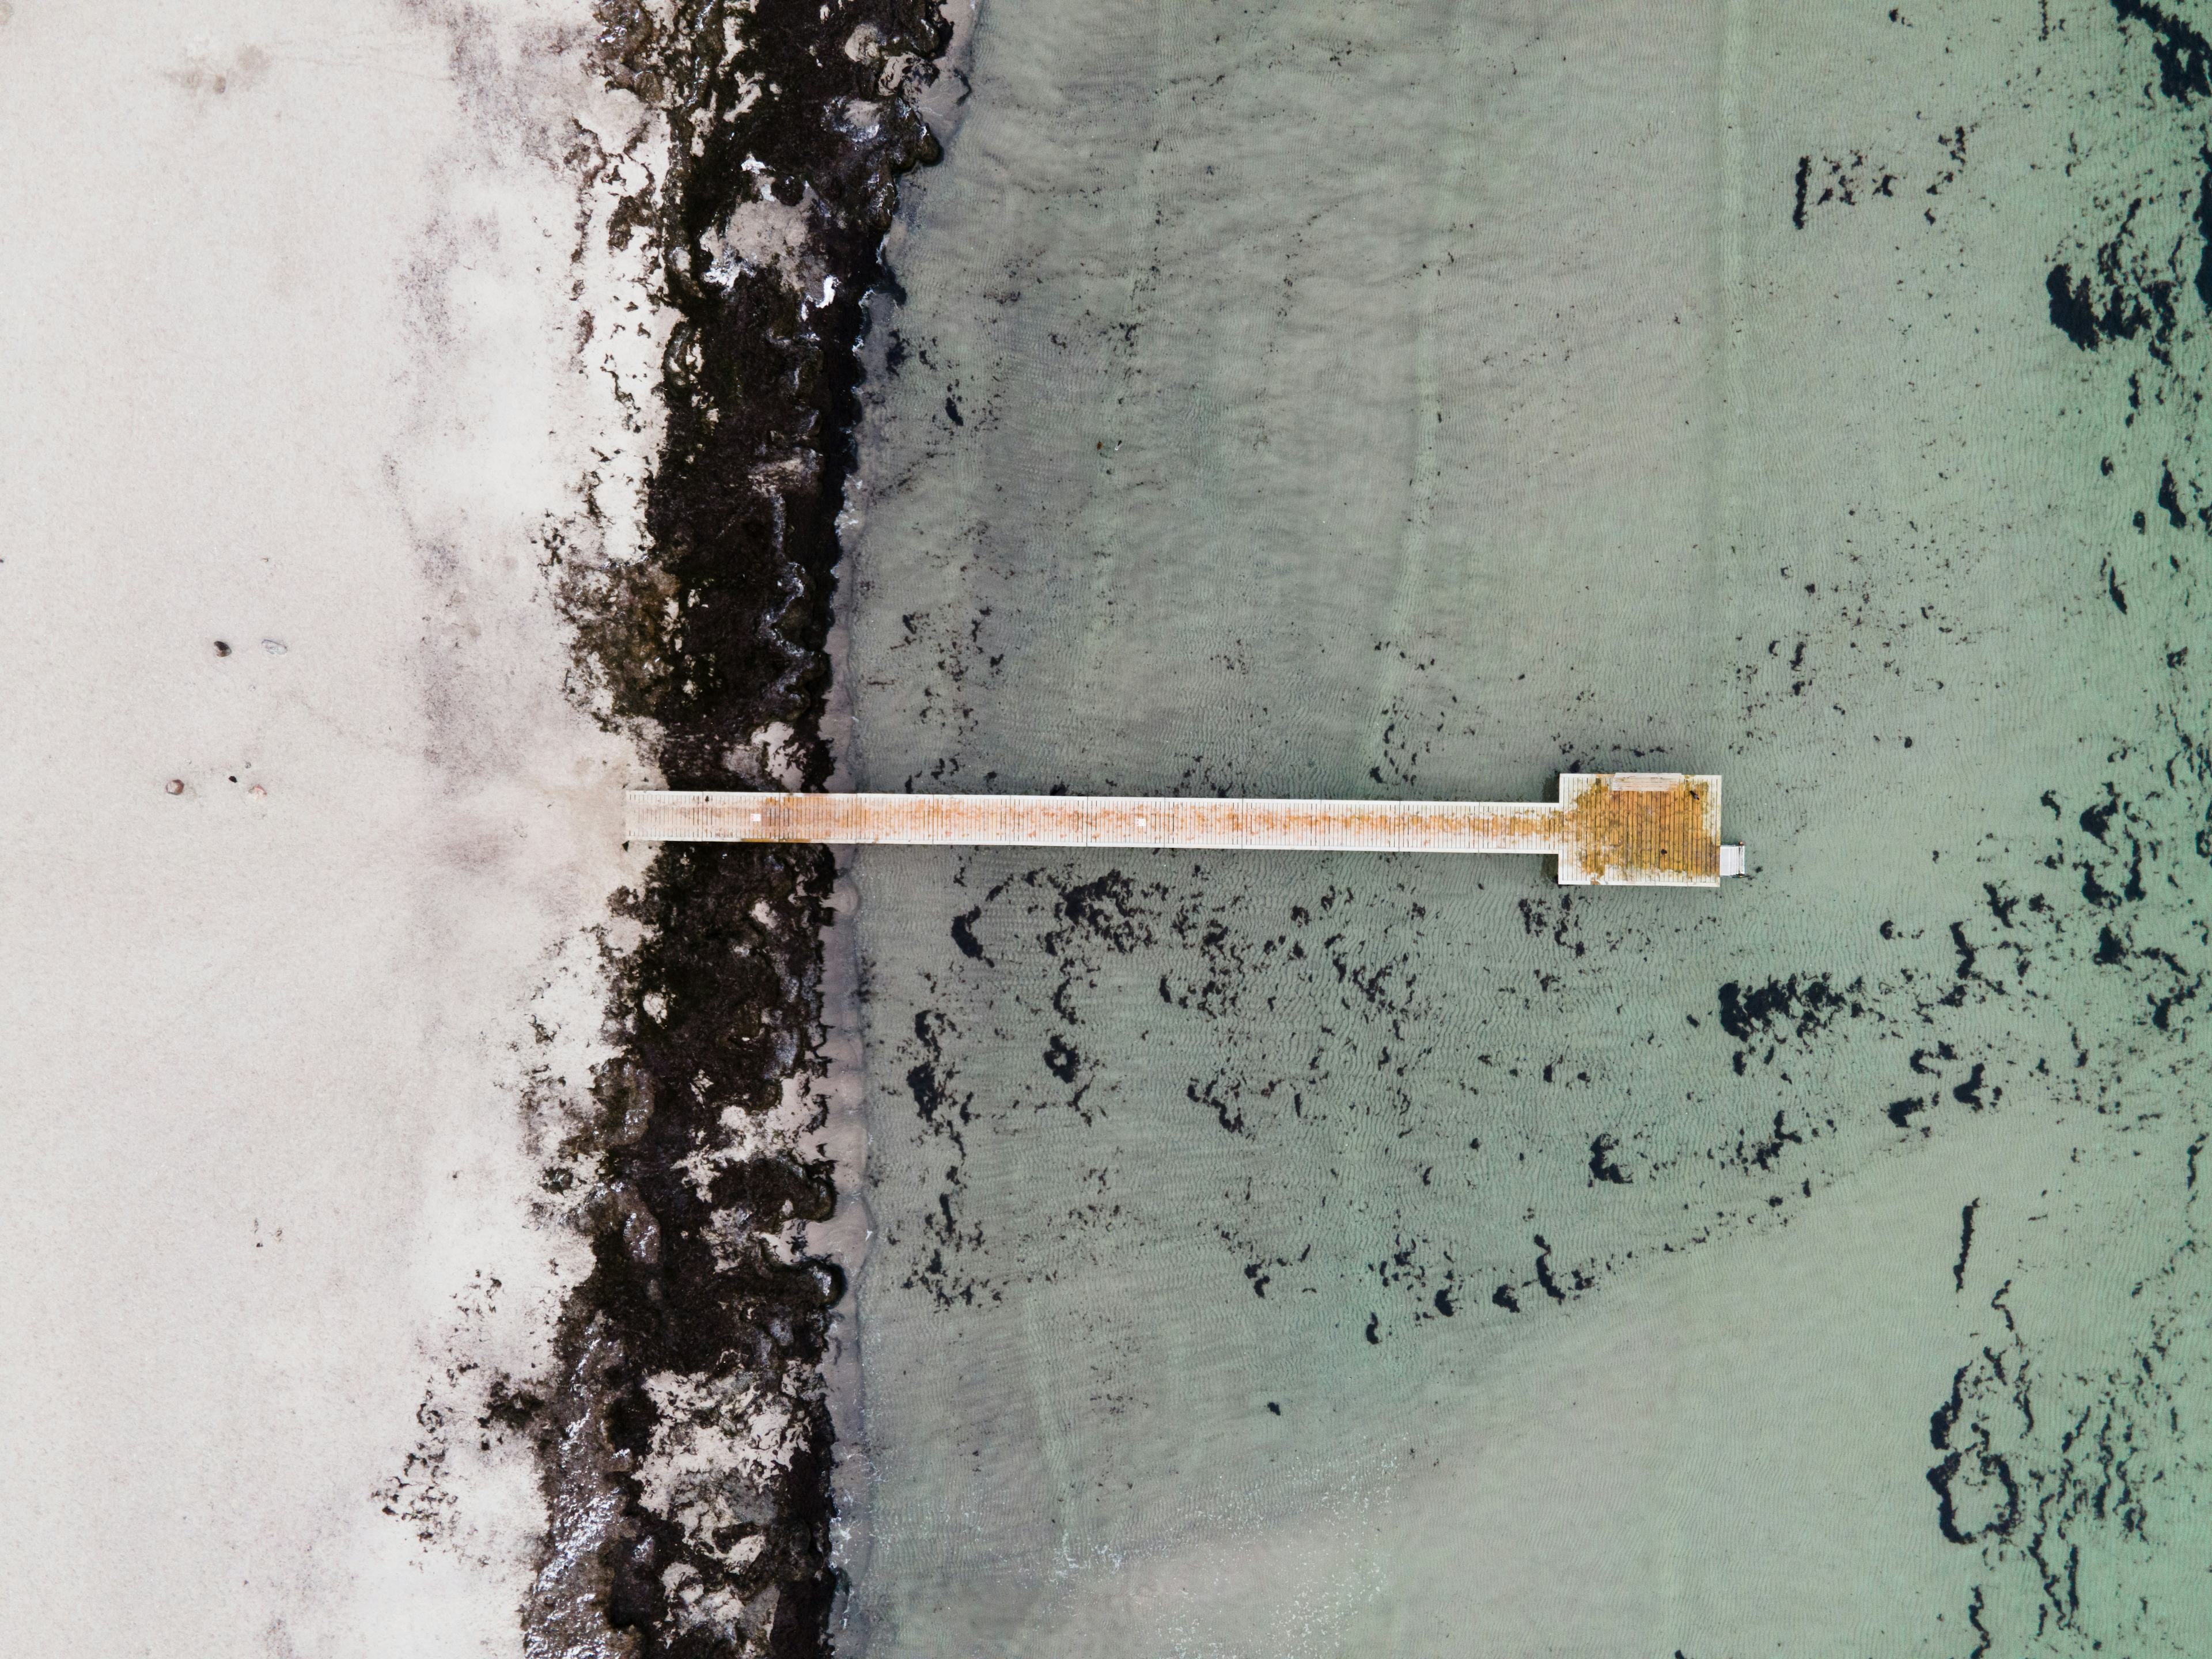 Beach covered with snow in bird's eye view. The water is covered with a layer of ice and snow. A wooden footbridge leads into the water.